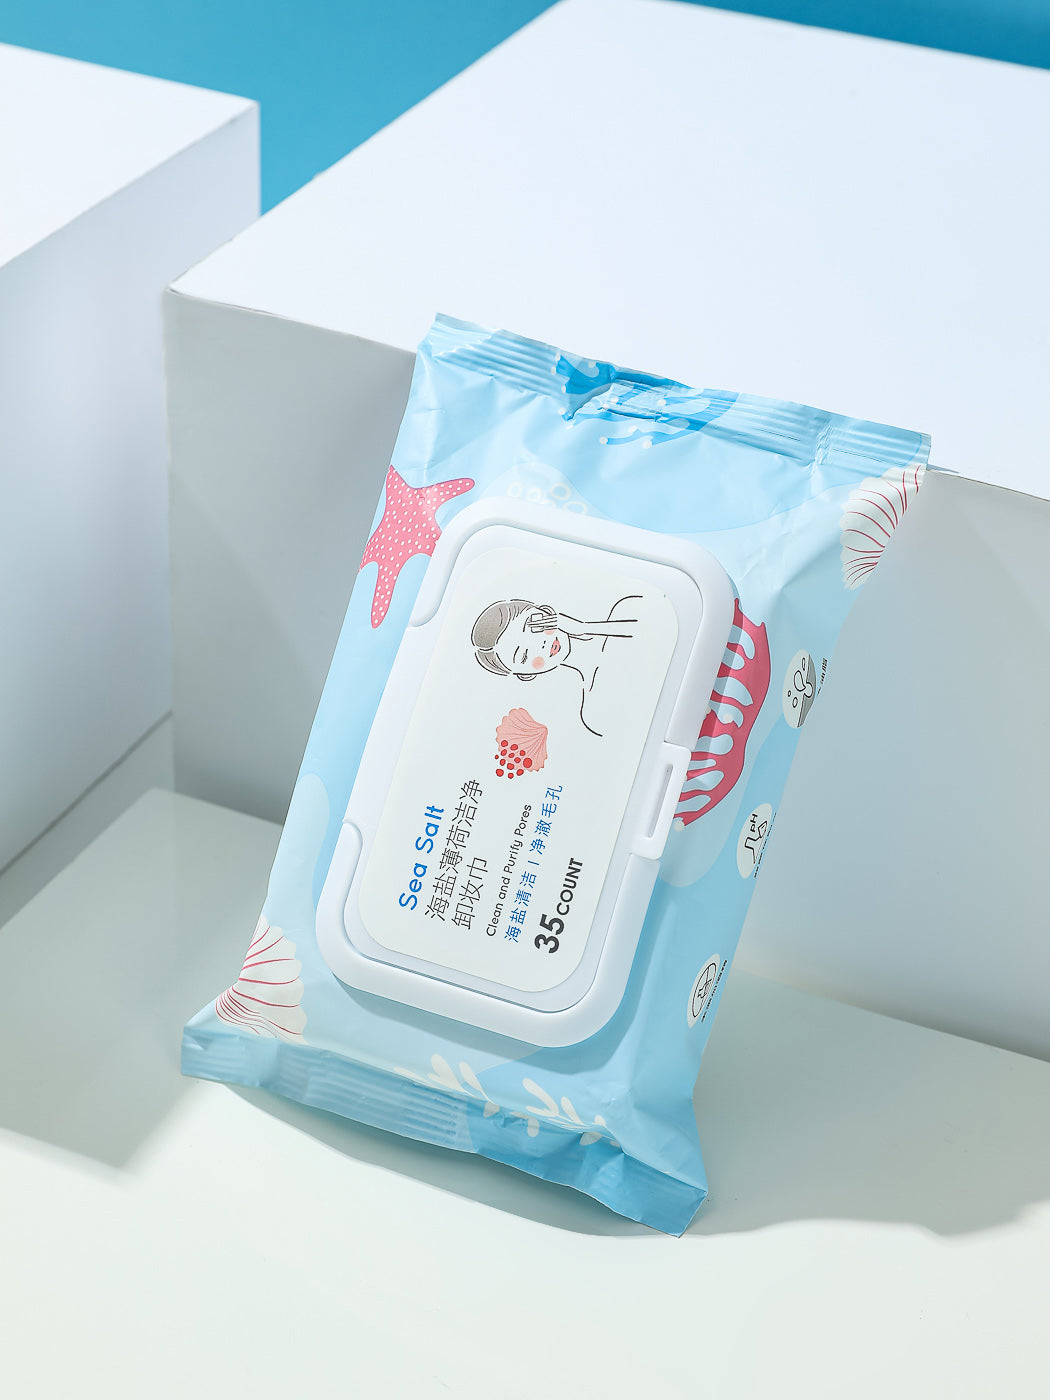 MINISO SEA SALT MINT MAKEUP REMOVER WIPES (35 WIPES) 2008470010107 MAKEUP REMOVER